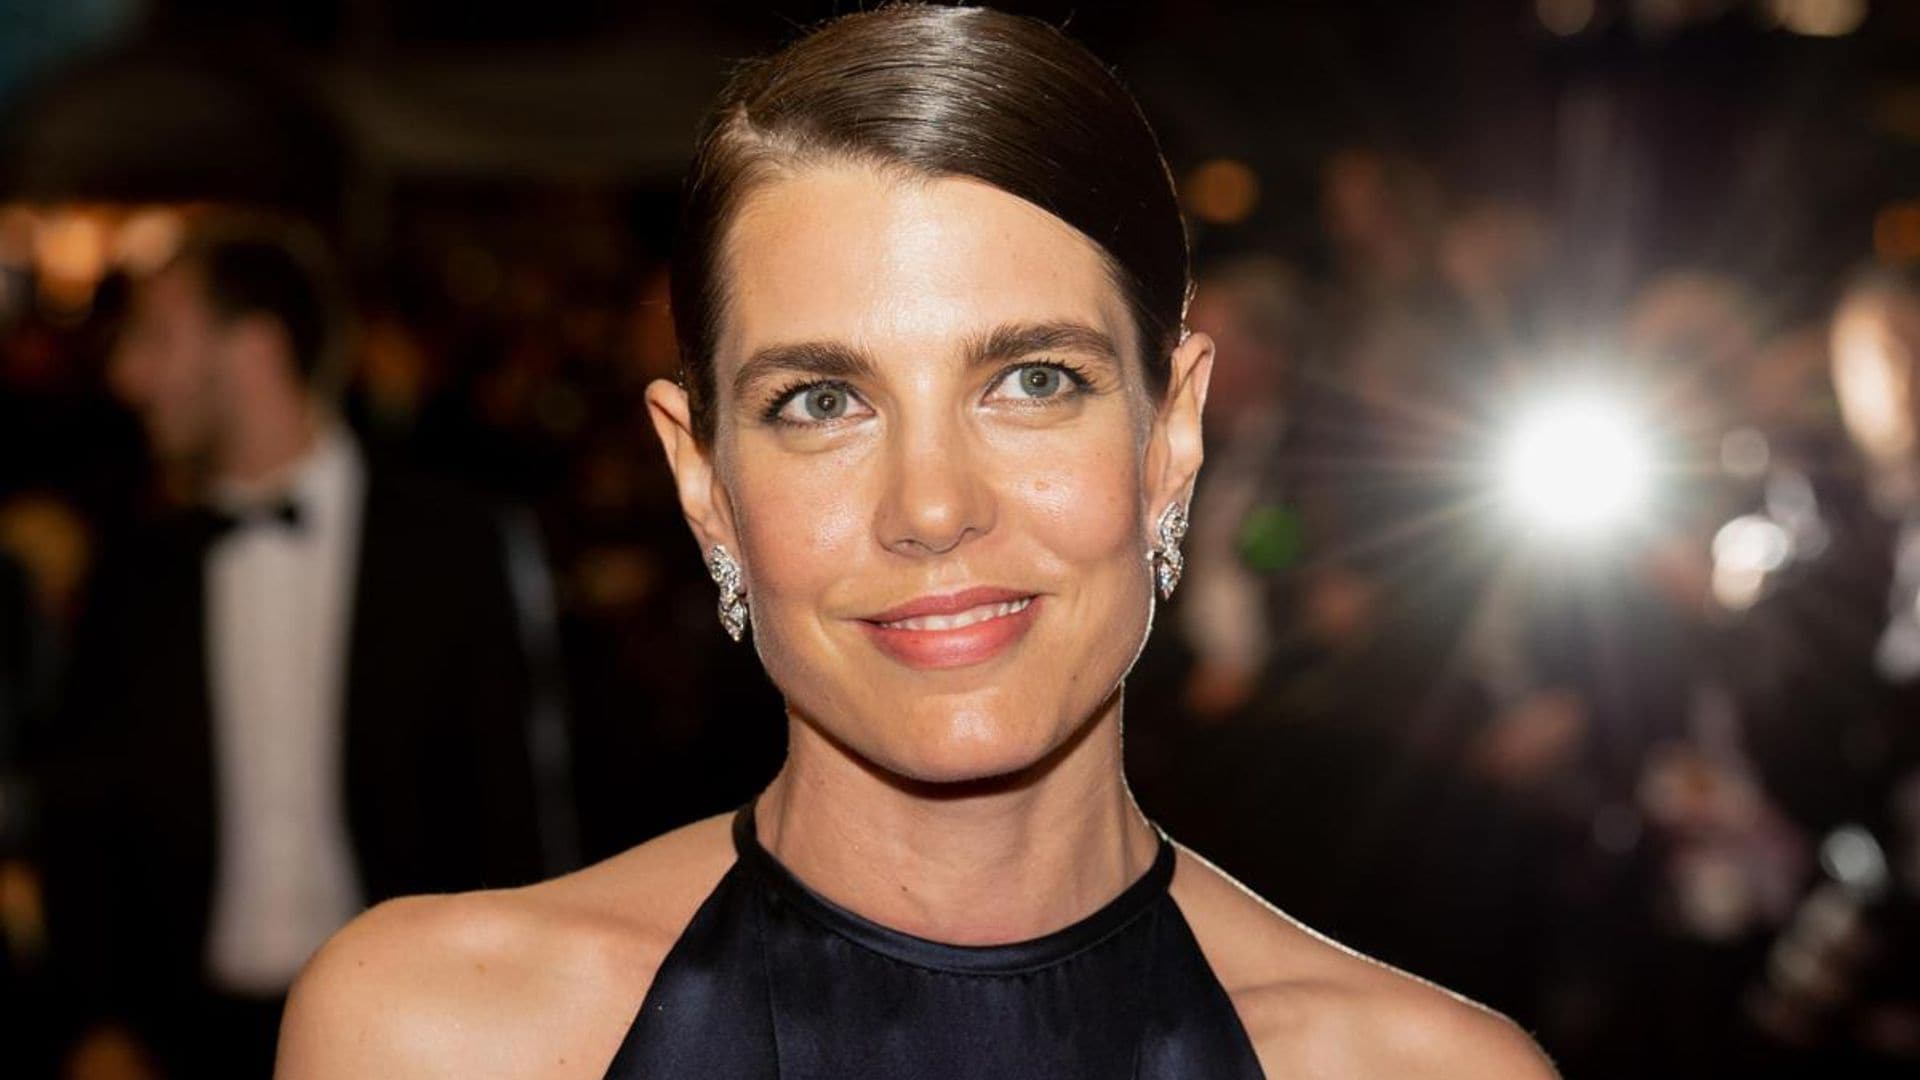 Charlotte Casiraghi expecting third child: Report